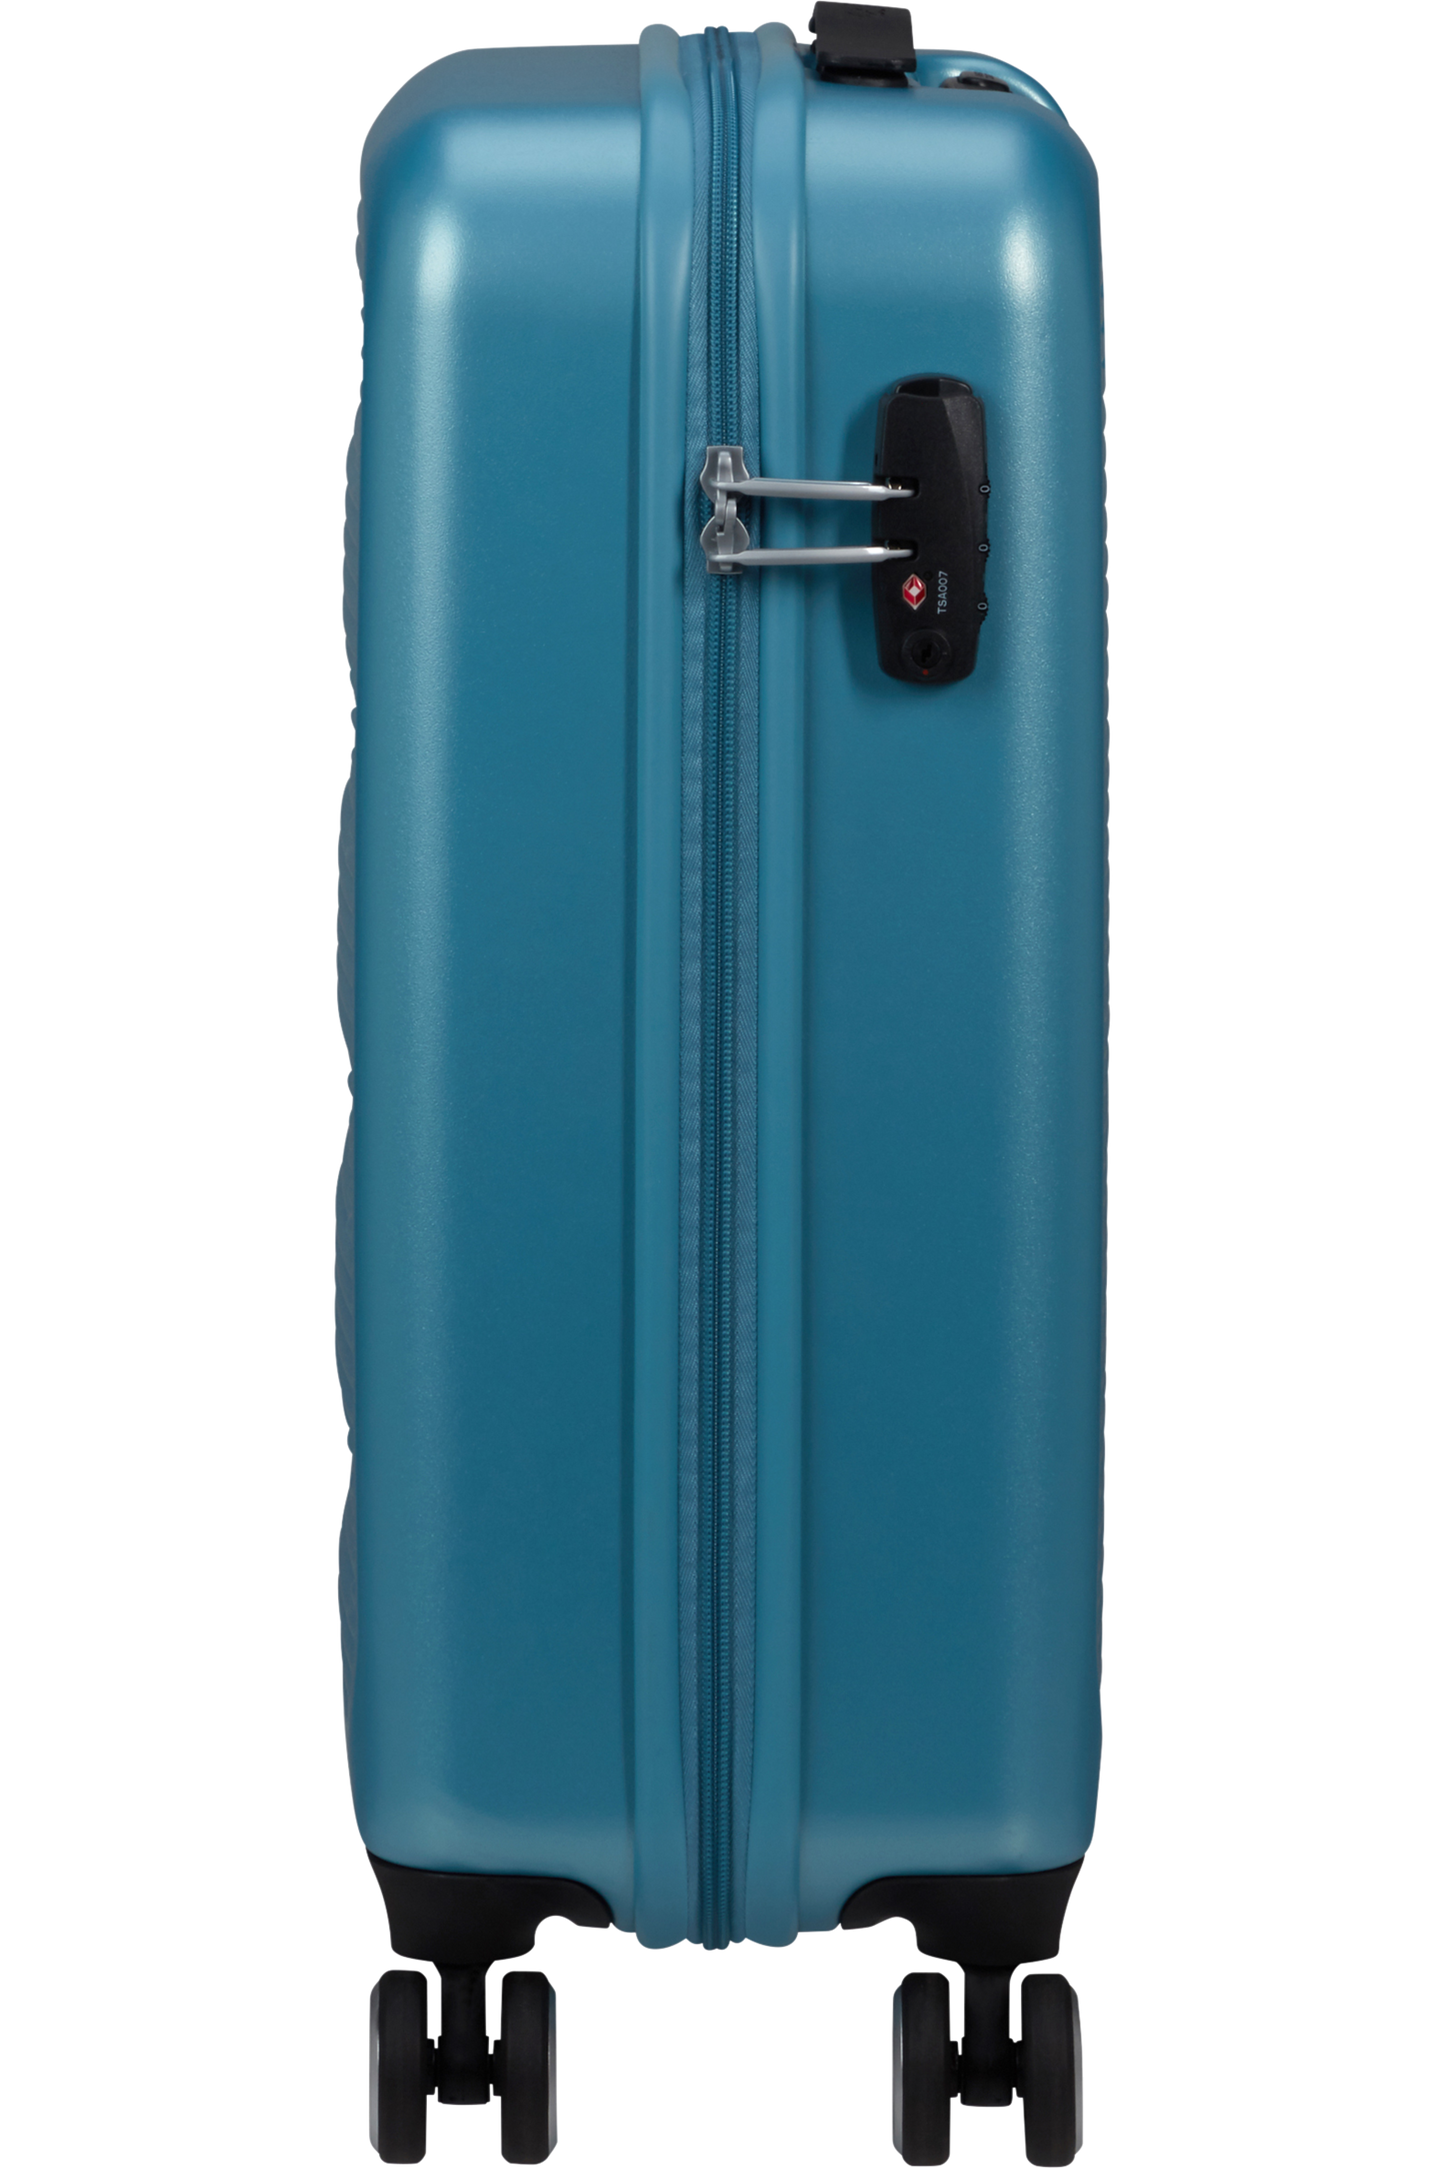 Trolley cabina spinner 4 ruote 55 cm  - Astrobeam - American Tourister